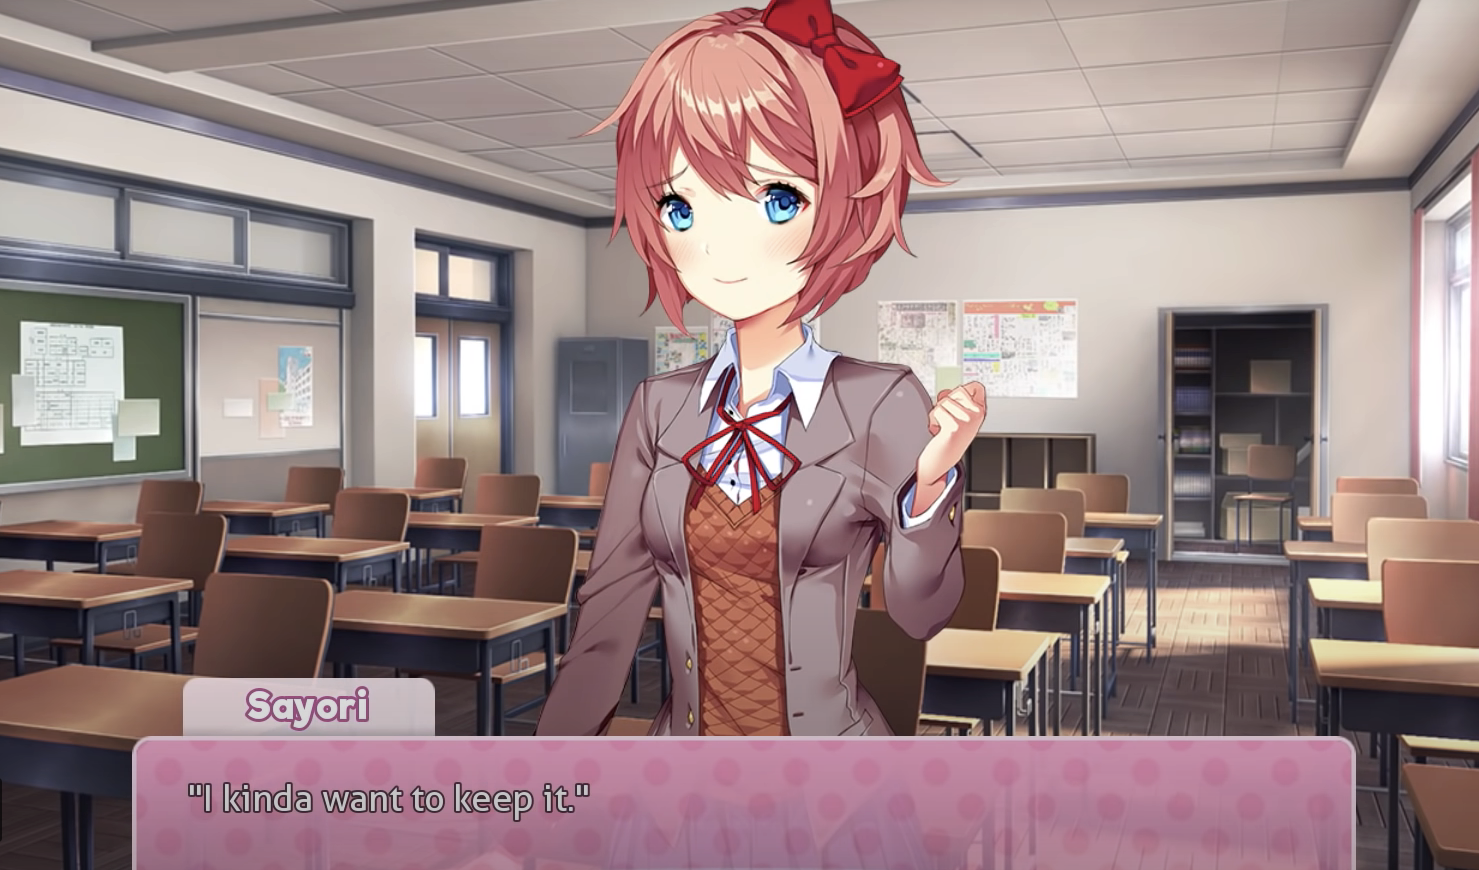 A screenshot from Doki Doki Literature Club with Sayori, an anime-style girl with pink hair and dressed in a school uniform, saying &quot;i kinda want to keep it&quot;